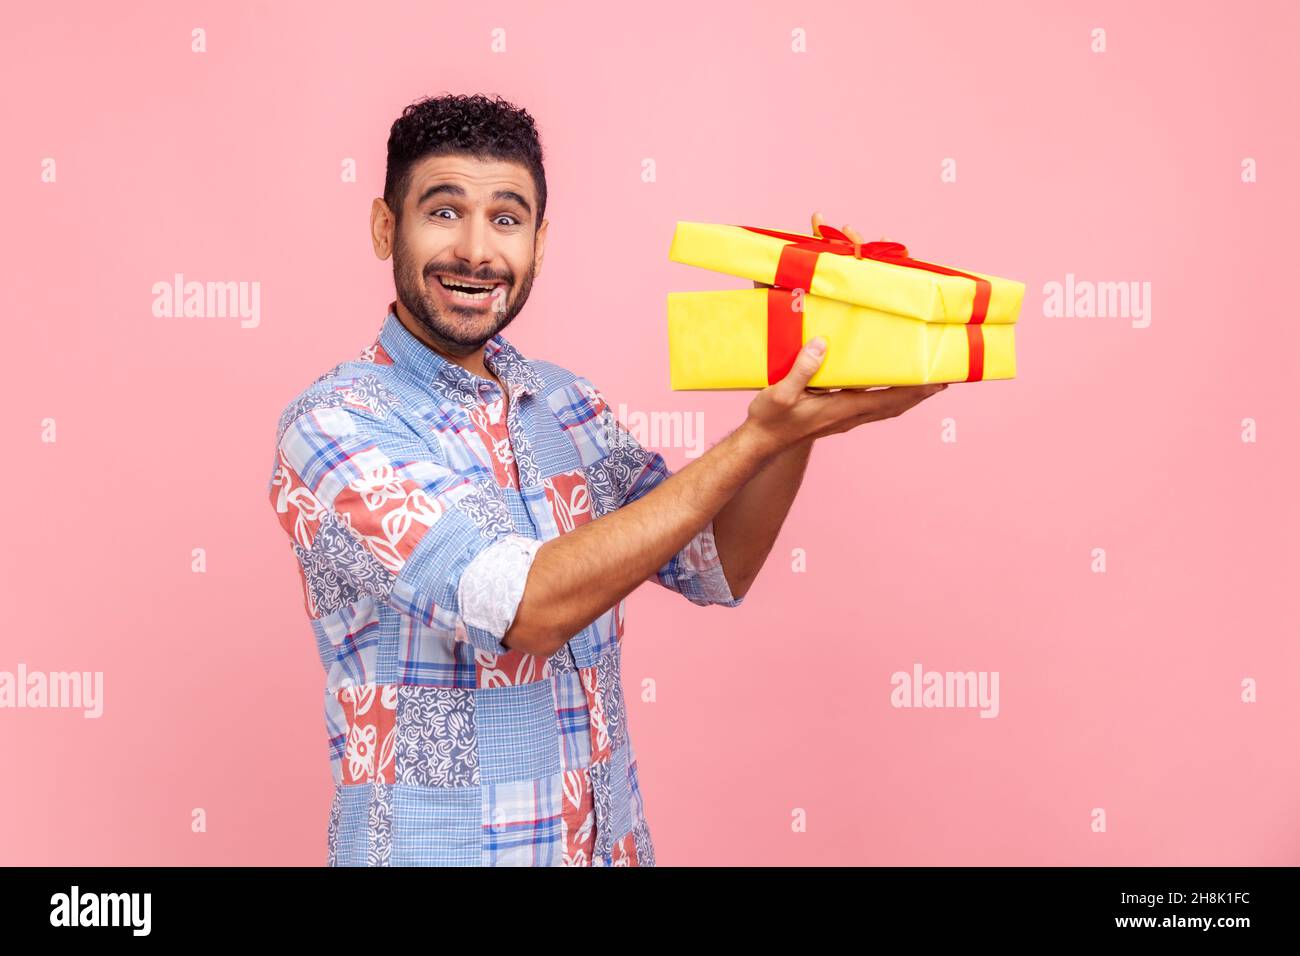 Happy excited man with beard holding in hands half opened yellow wrapped present box, looking at camera with excitement and surprise. Indoor studio shot isolated on pink background. Stock Photo